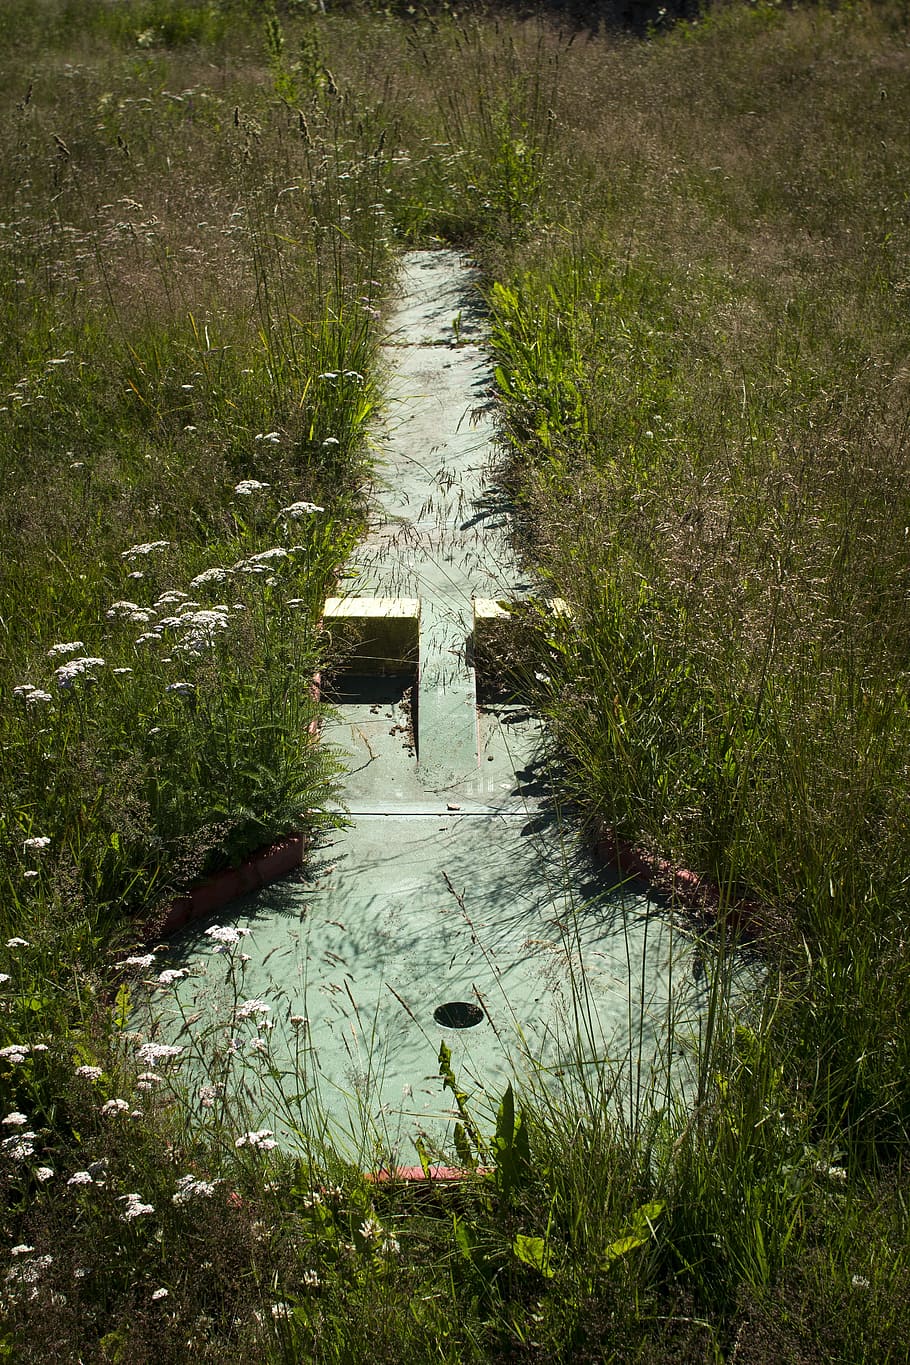 Miniature Golf, Abandoned, Grass, Game, water, nature, reflection, lake, plant, growth